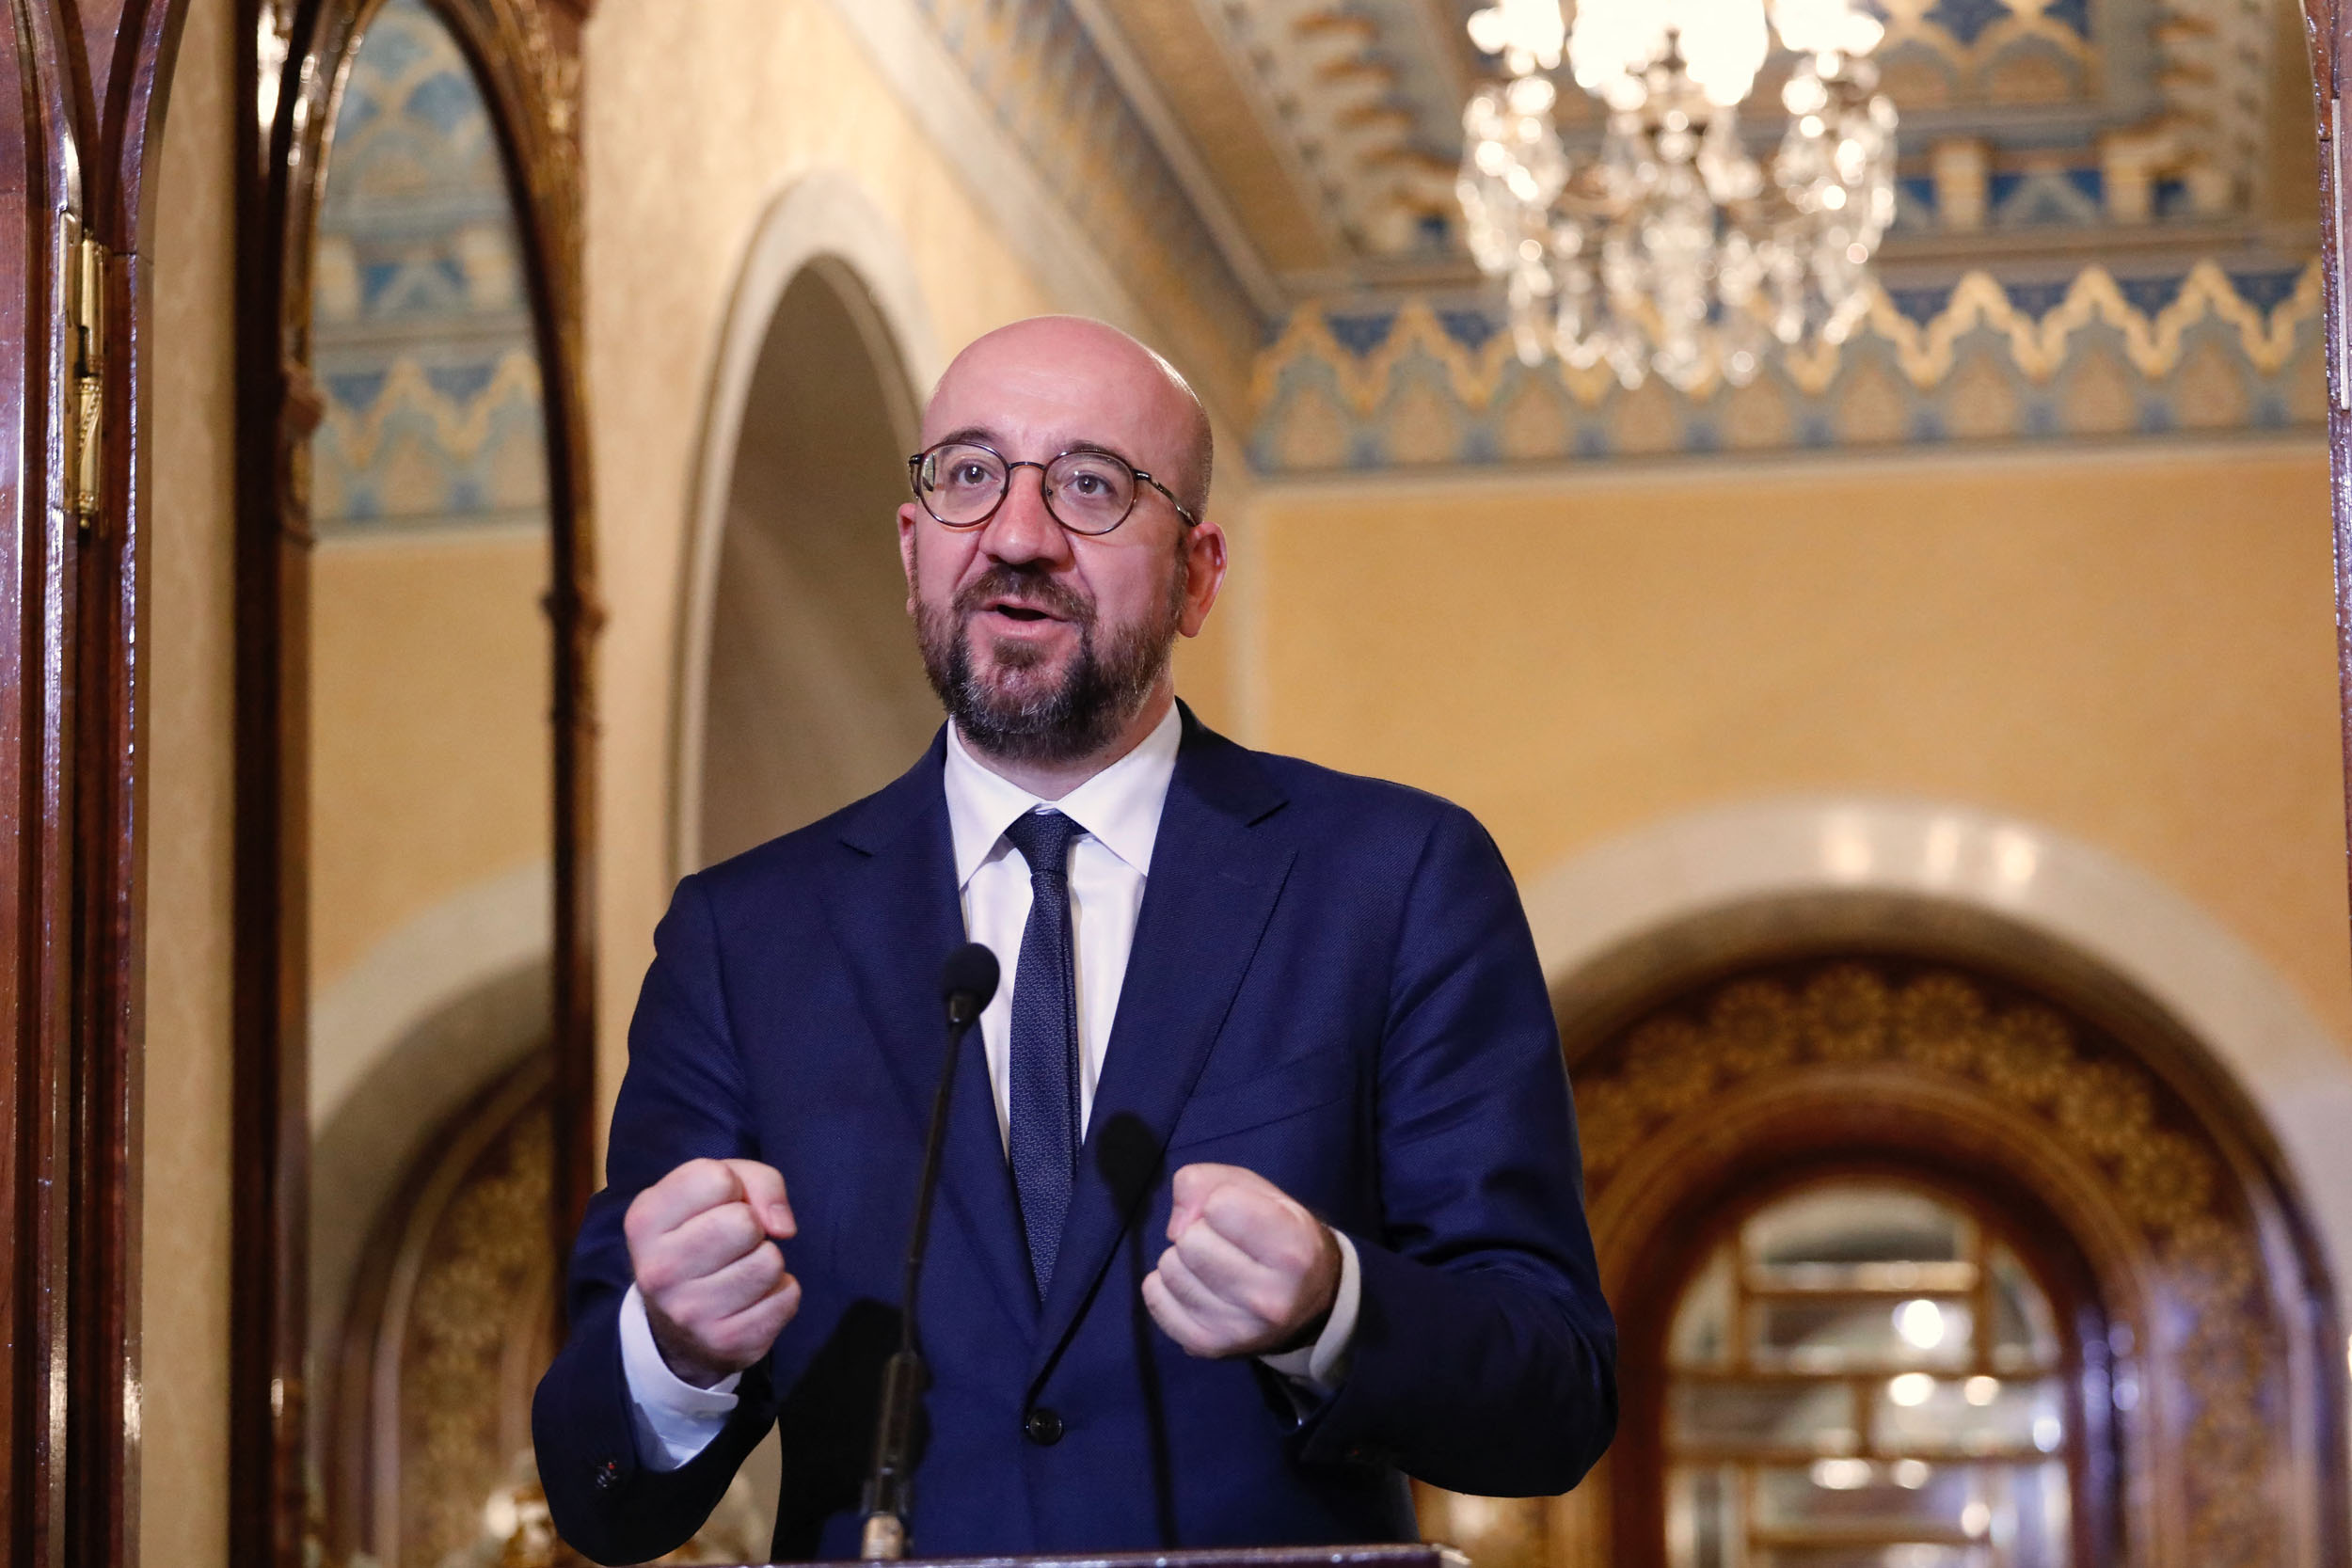 This handout picture released by the European Council (EC) on April 5, 2021 shows President of the European Council Charles Michel giving a press statement at Carthage Palace east of the capital Tunis. (Photo by DARIO PIGNATELLI / EBS / AFP) / XGTY / RESTRICTED TO EDITORIAL USE - MANDATORY CREDIT "AFP PHOTO / EUROPEAN COUNCIL/ DARIO PIGNATELLI" - NO MARKETING - NO ADVERTISING CAMPAIGNS - DISTRIBUTED AS A SERVICE TO CLIENTS